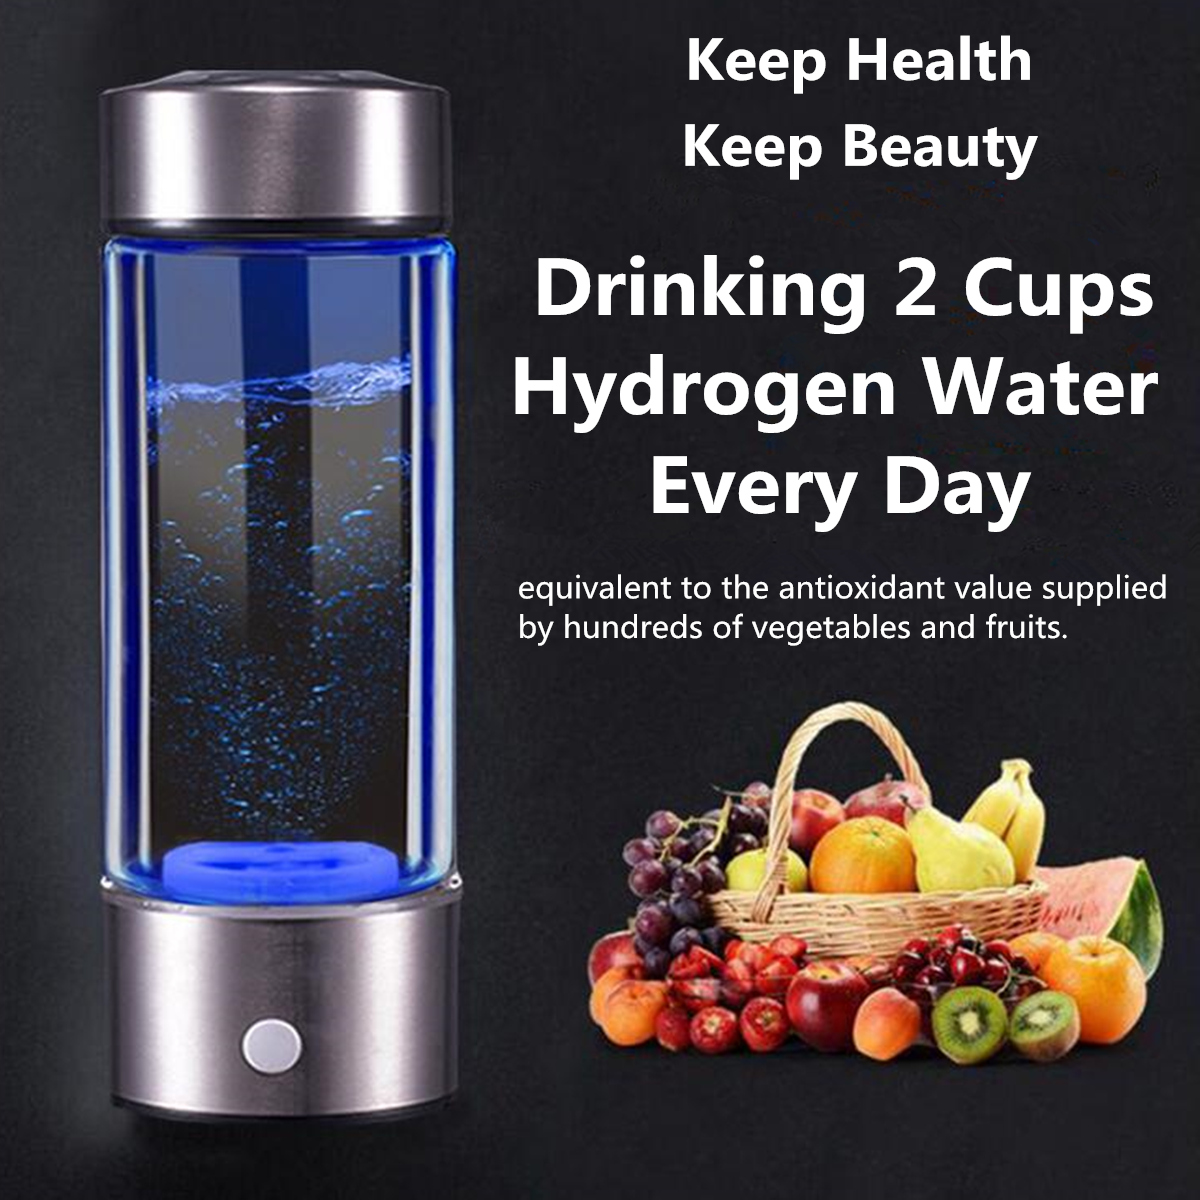 450ml-Portable-H-Rich-Water-Maker-Ionizer-Generator-Water-Cup-Bottle-USB-Filter-1448555-1